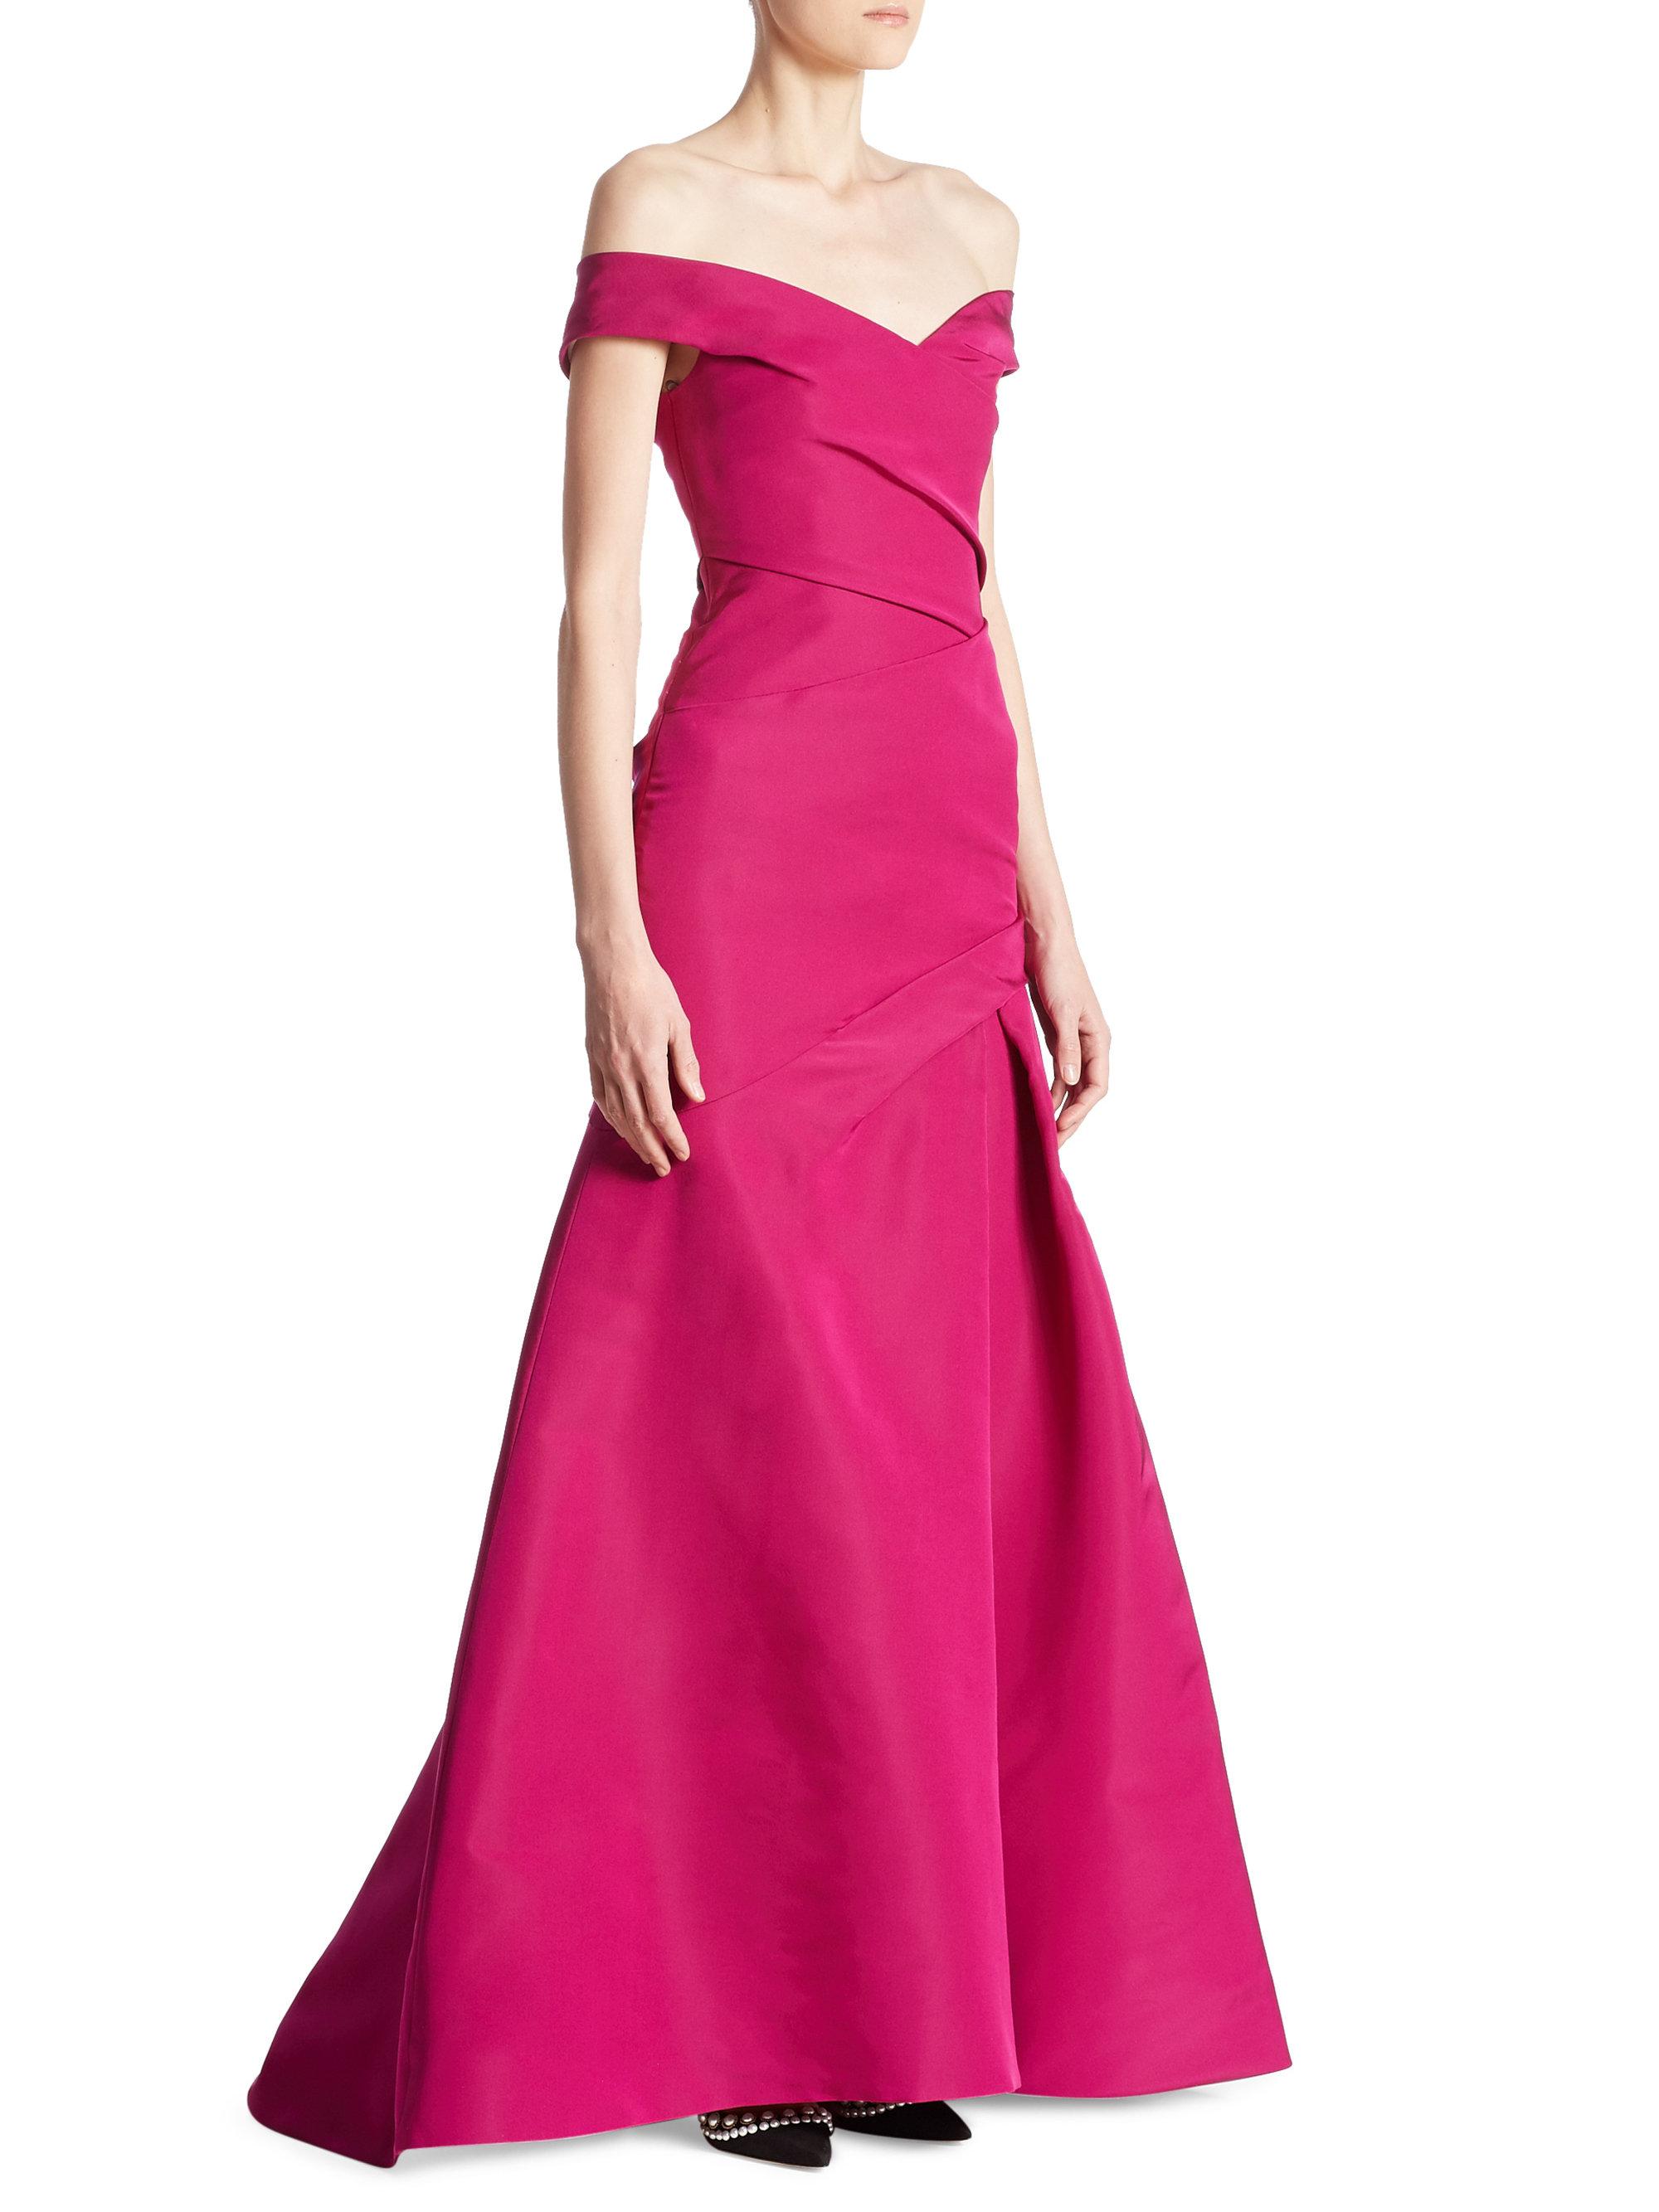 Lyst - Monique Lhuillier Off -the-shoulder Gown in Pink